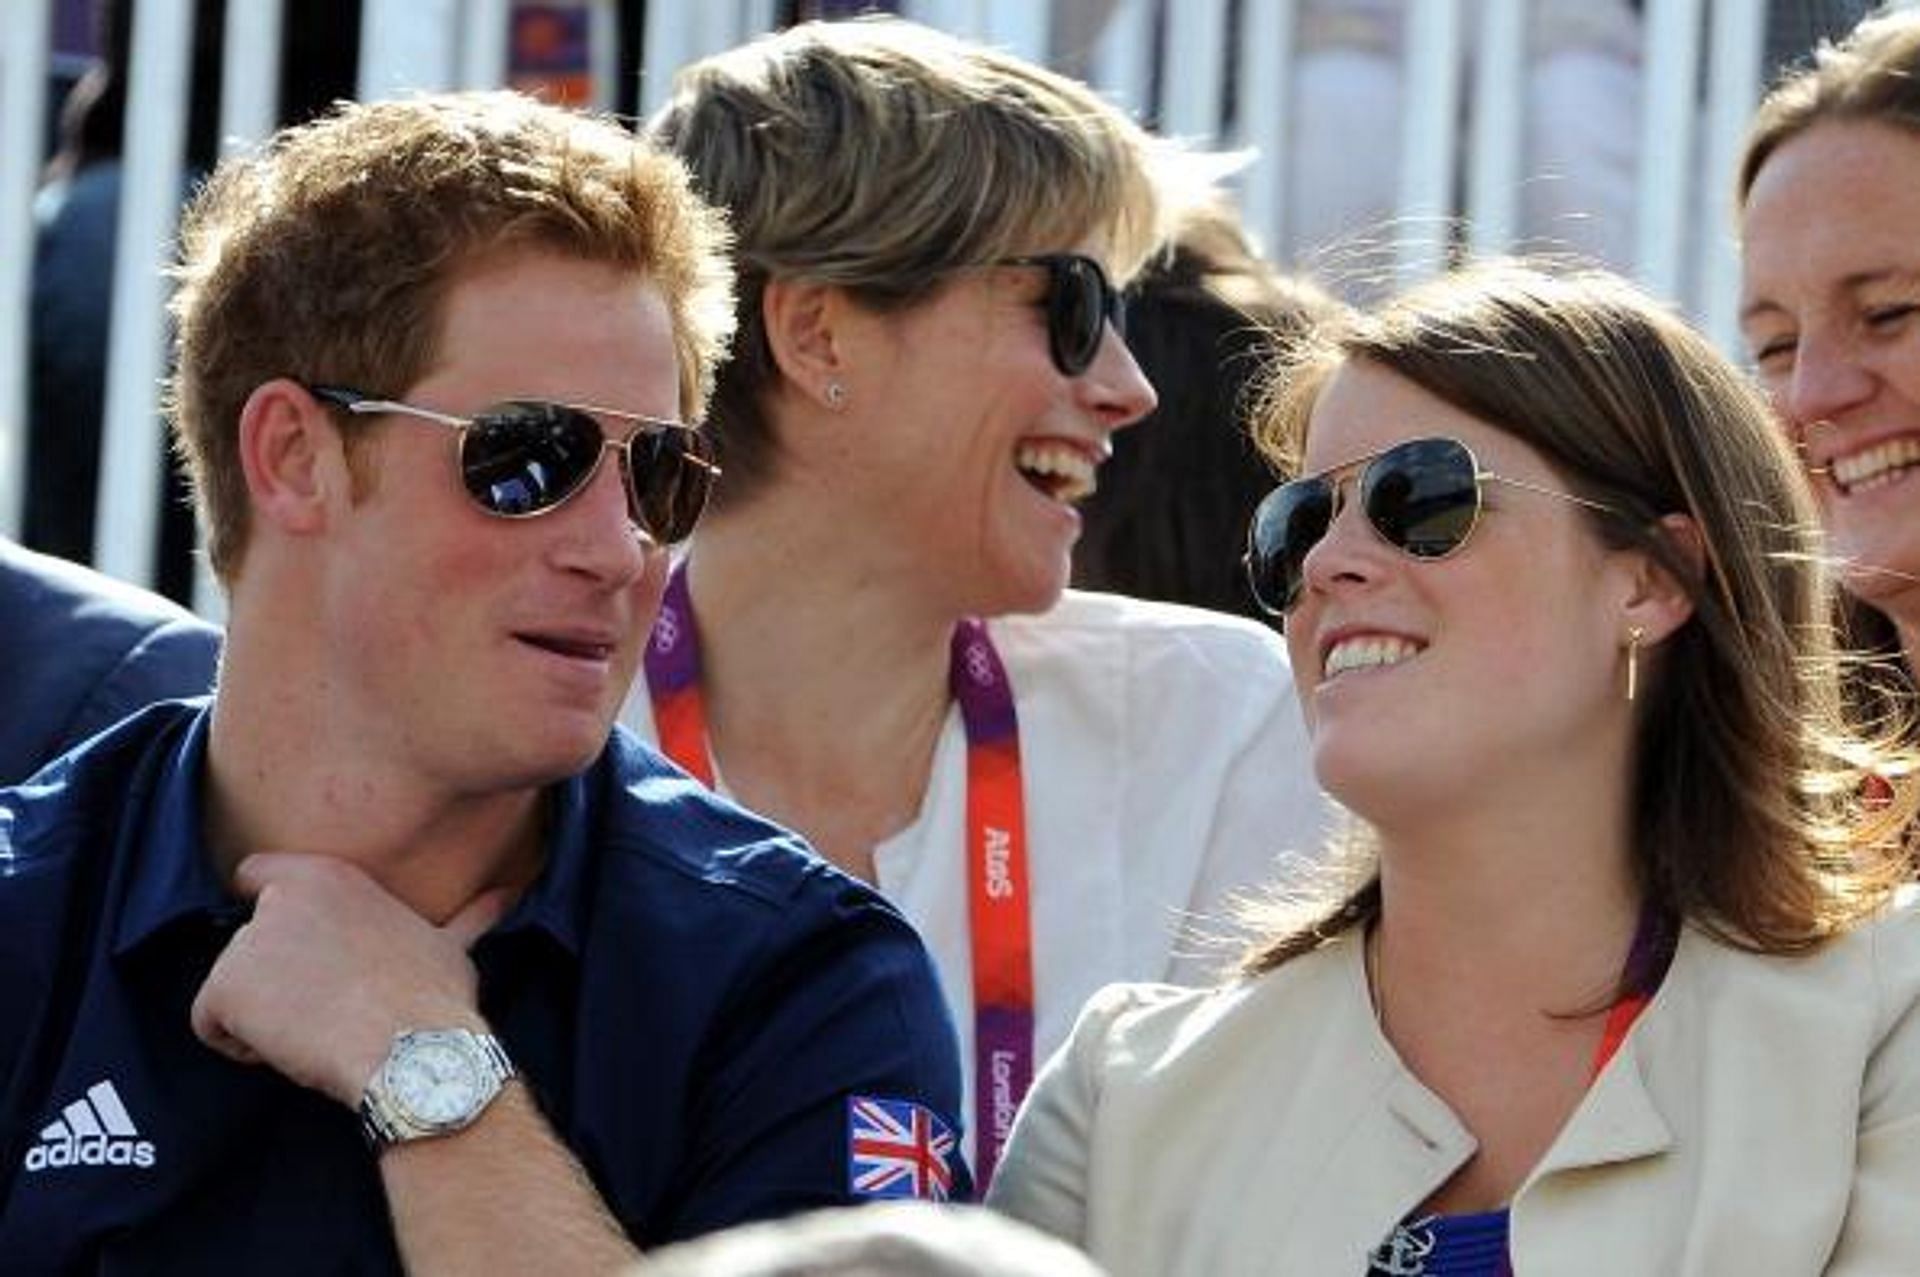 Prince Harry and Princess Eugenie spotted partying in the Glastonbury festival. (Image via Getty Images/Pascal Le Segretain)